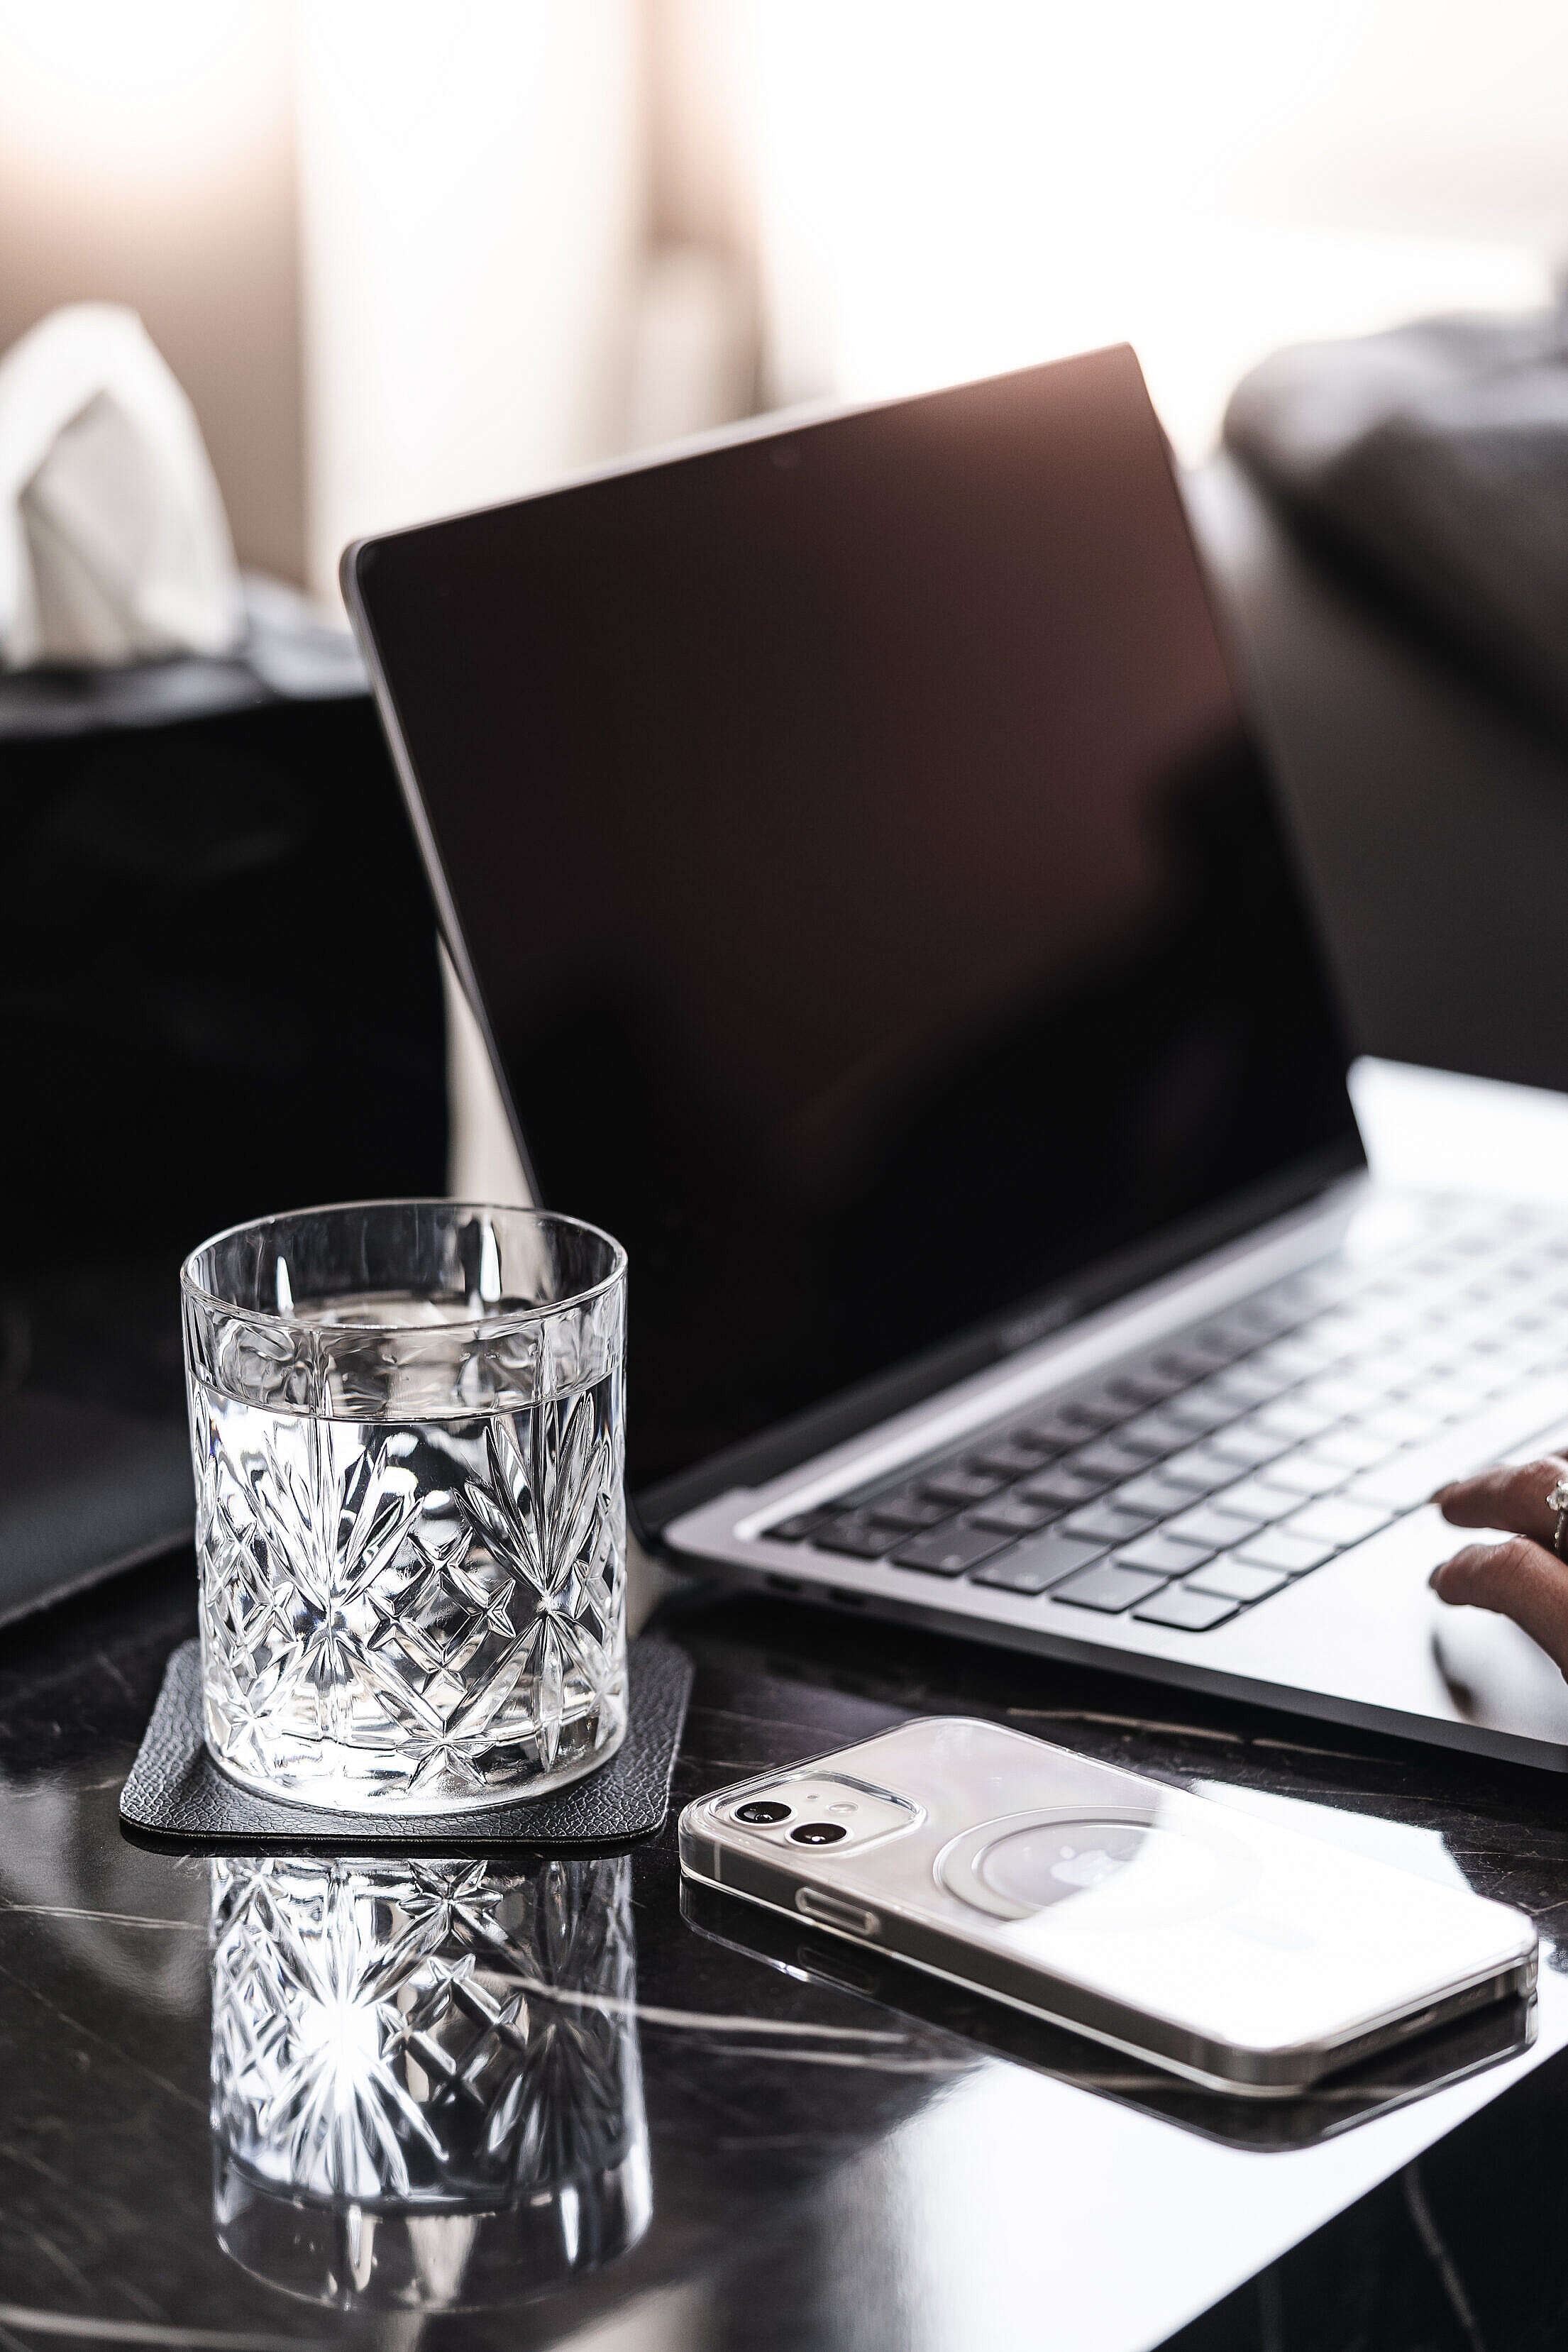 Laptop and Smartphone with a Crystal Glass of Water on a Luxury Marble Table Free Stock Photo